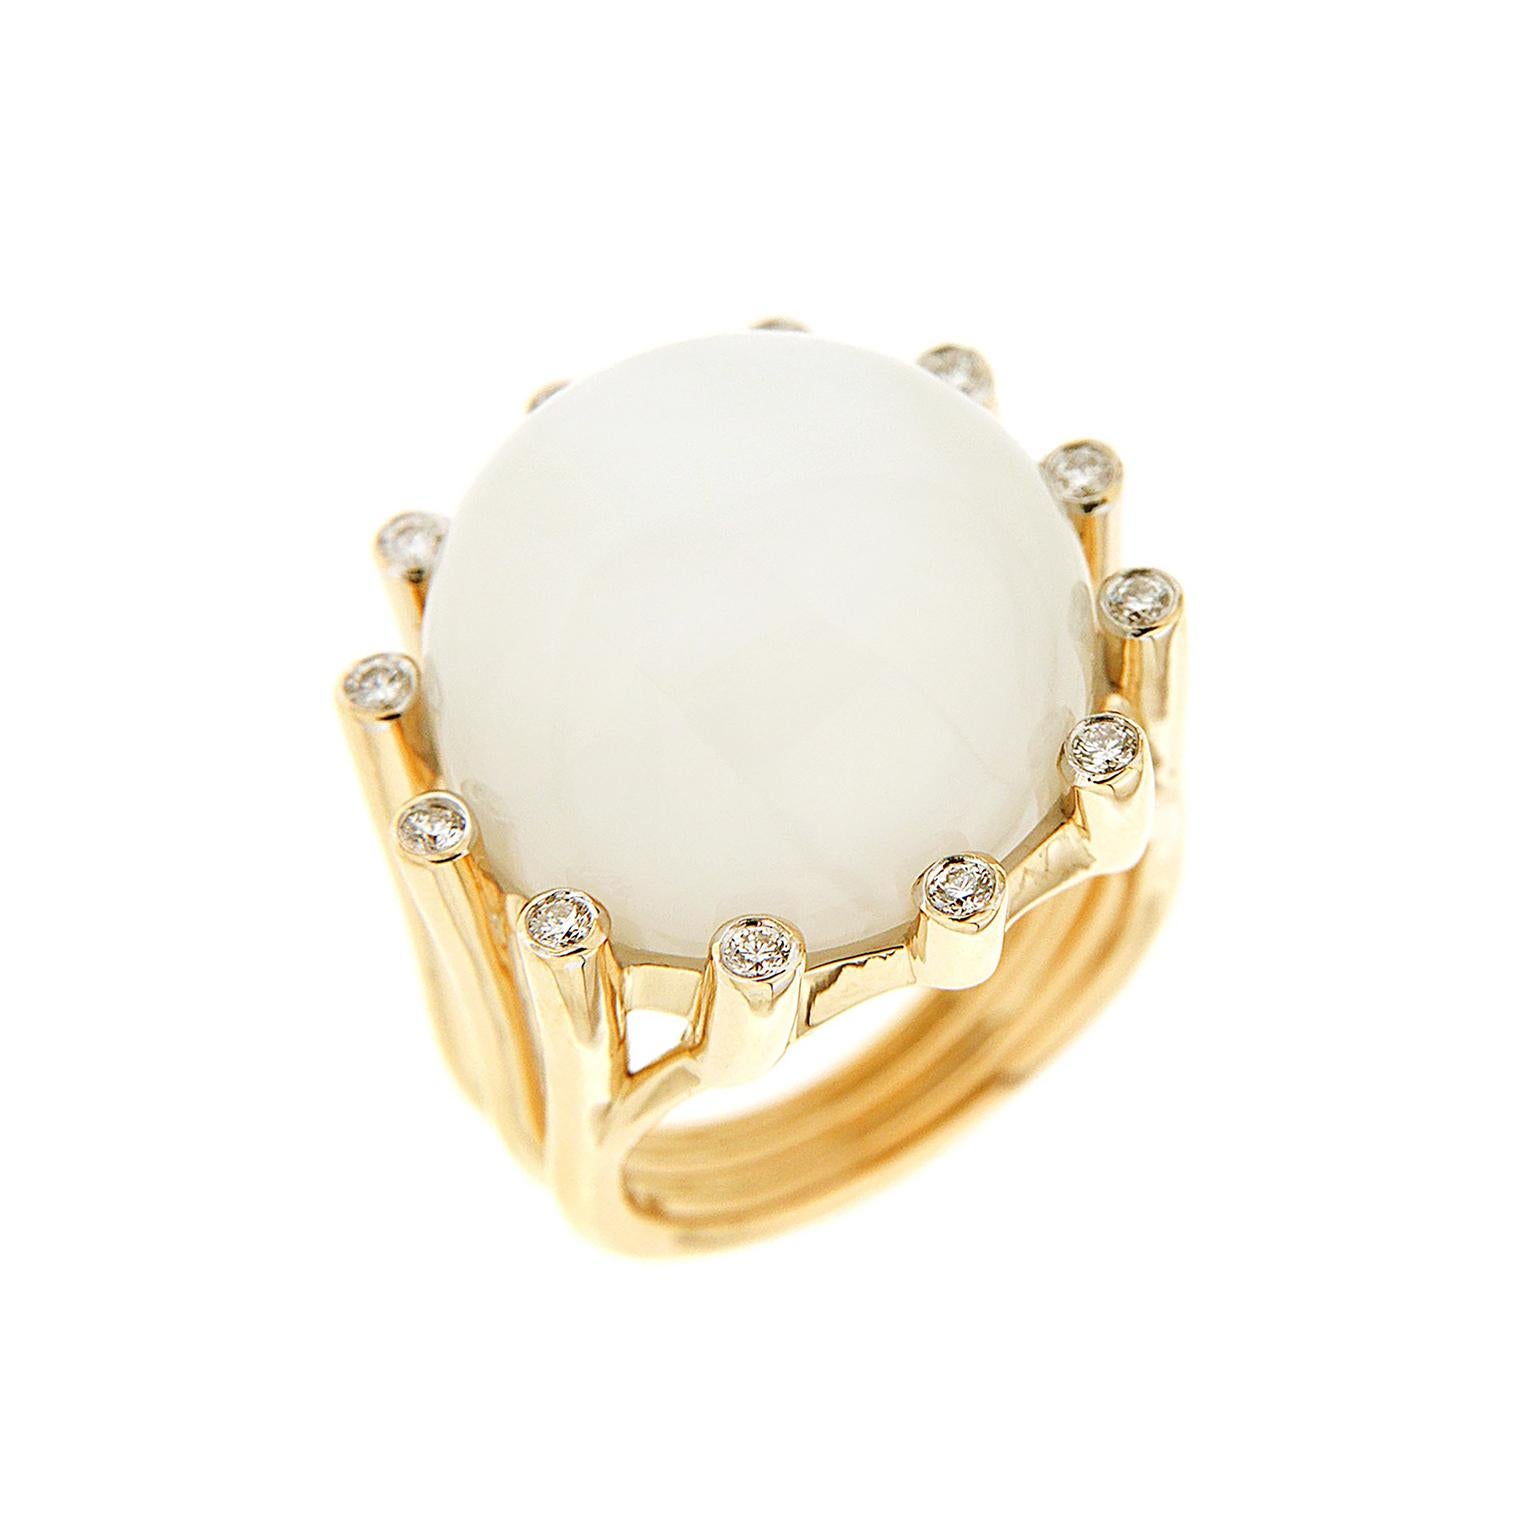 Valentin Magro La Luna Moonstone Gold Ring brings together sun and moon. The center gem is a white moonstone, carved into a round cabochon. This jewel is famed for ethereal light known as adularescence. Surrounding it are 18k yellow gold prongs